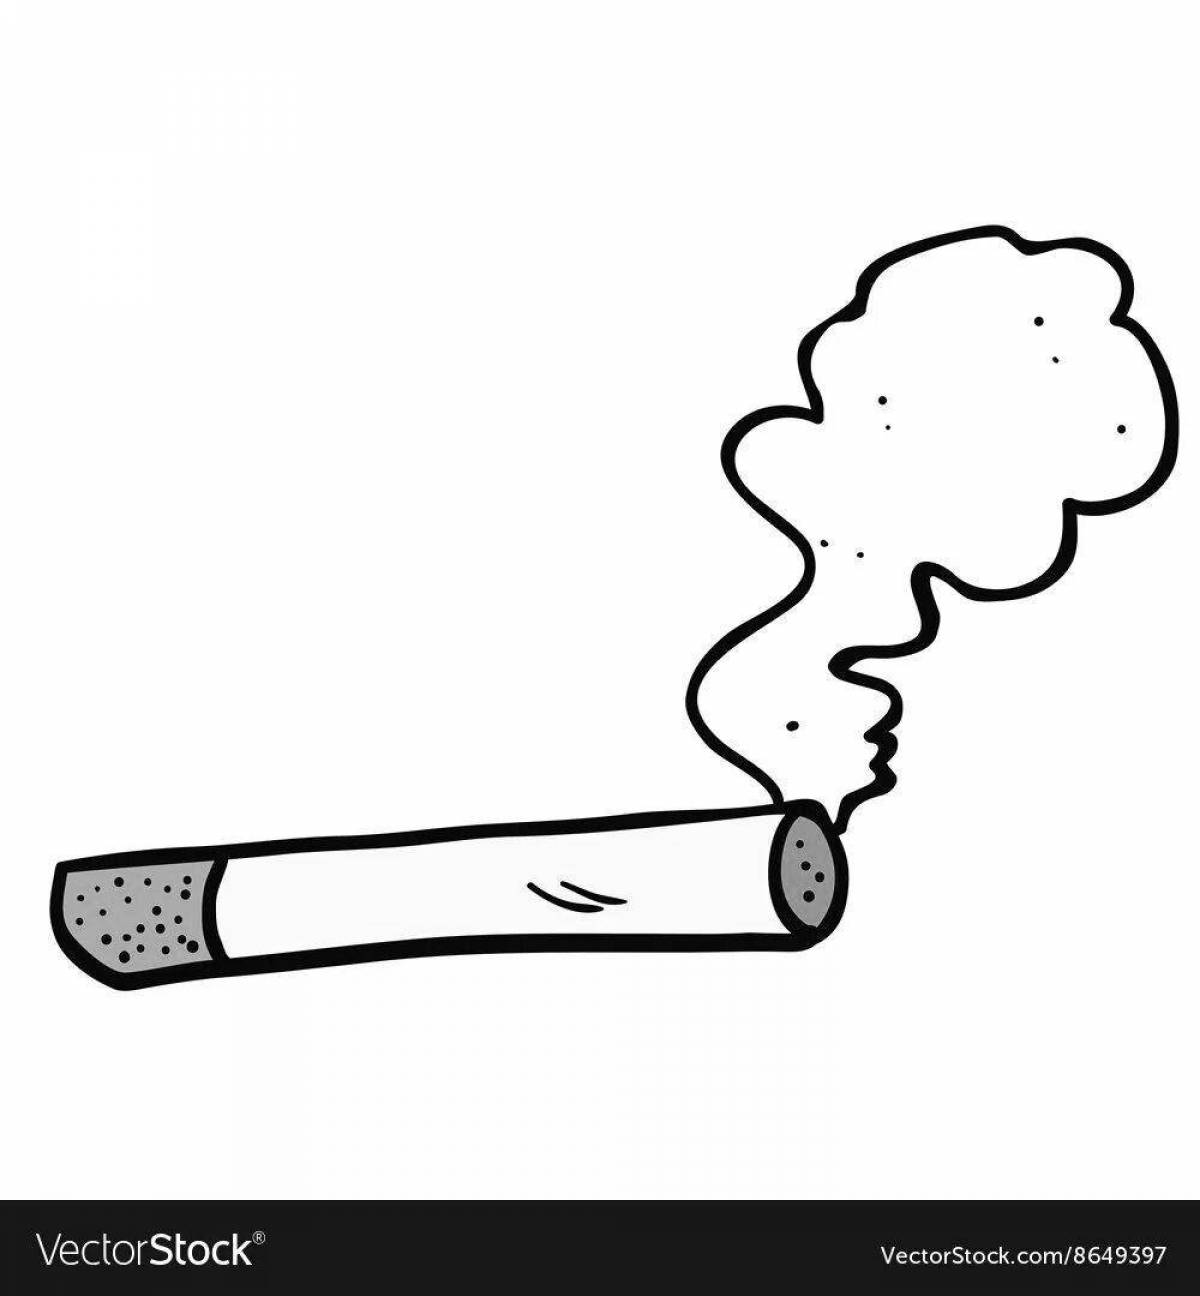 Exciting cigarette coloring page